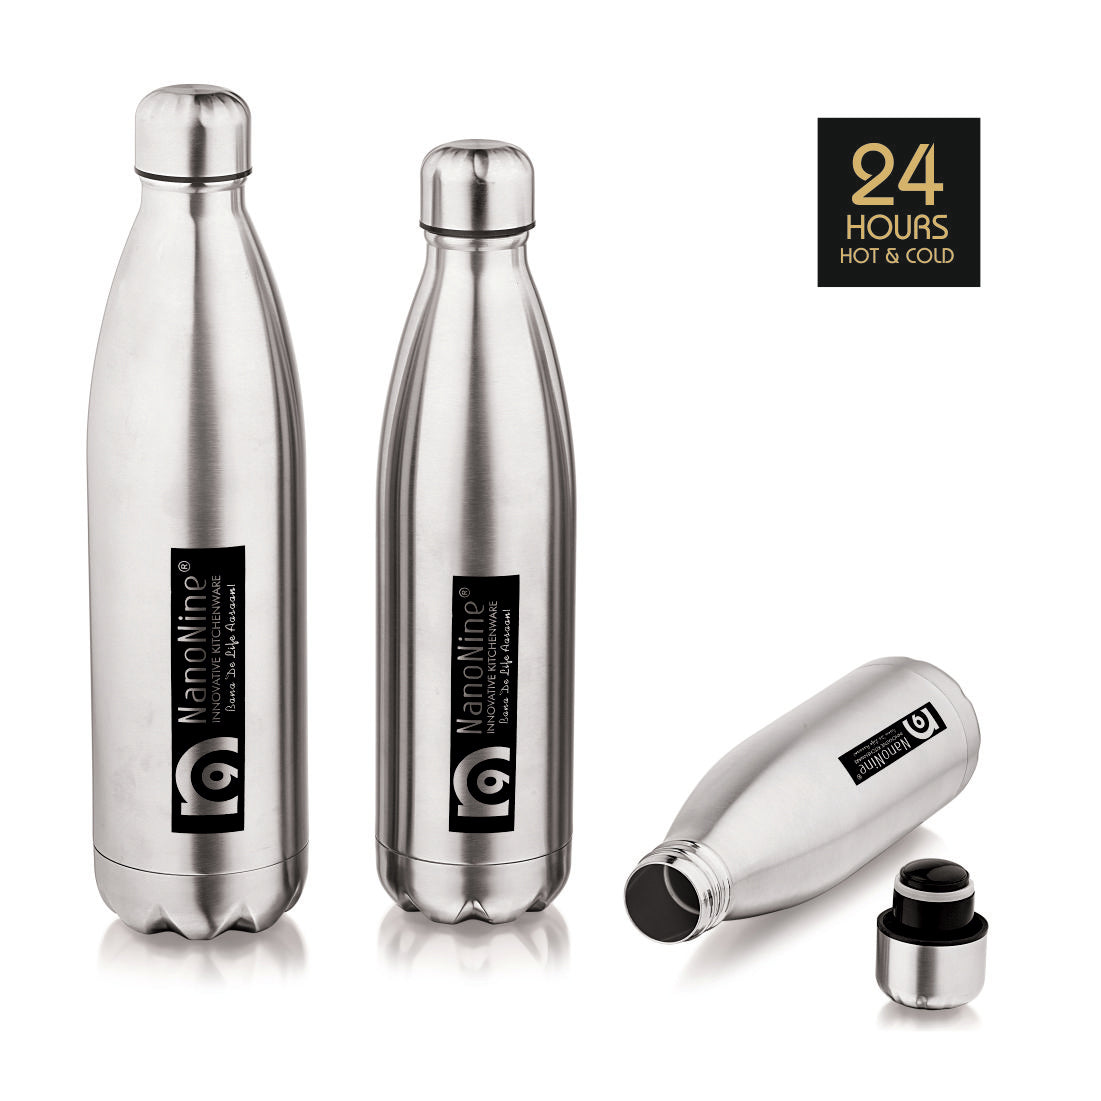 NanoNine Stainless Steel Vacuu-Bot 24 Hours Hot and Cold: The Ultimate Vacuum Bottle for Your Beverages Fresh and Tasty All Day Long.